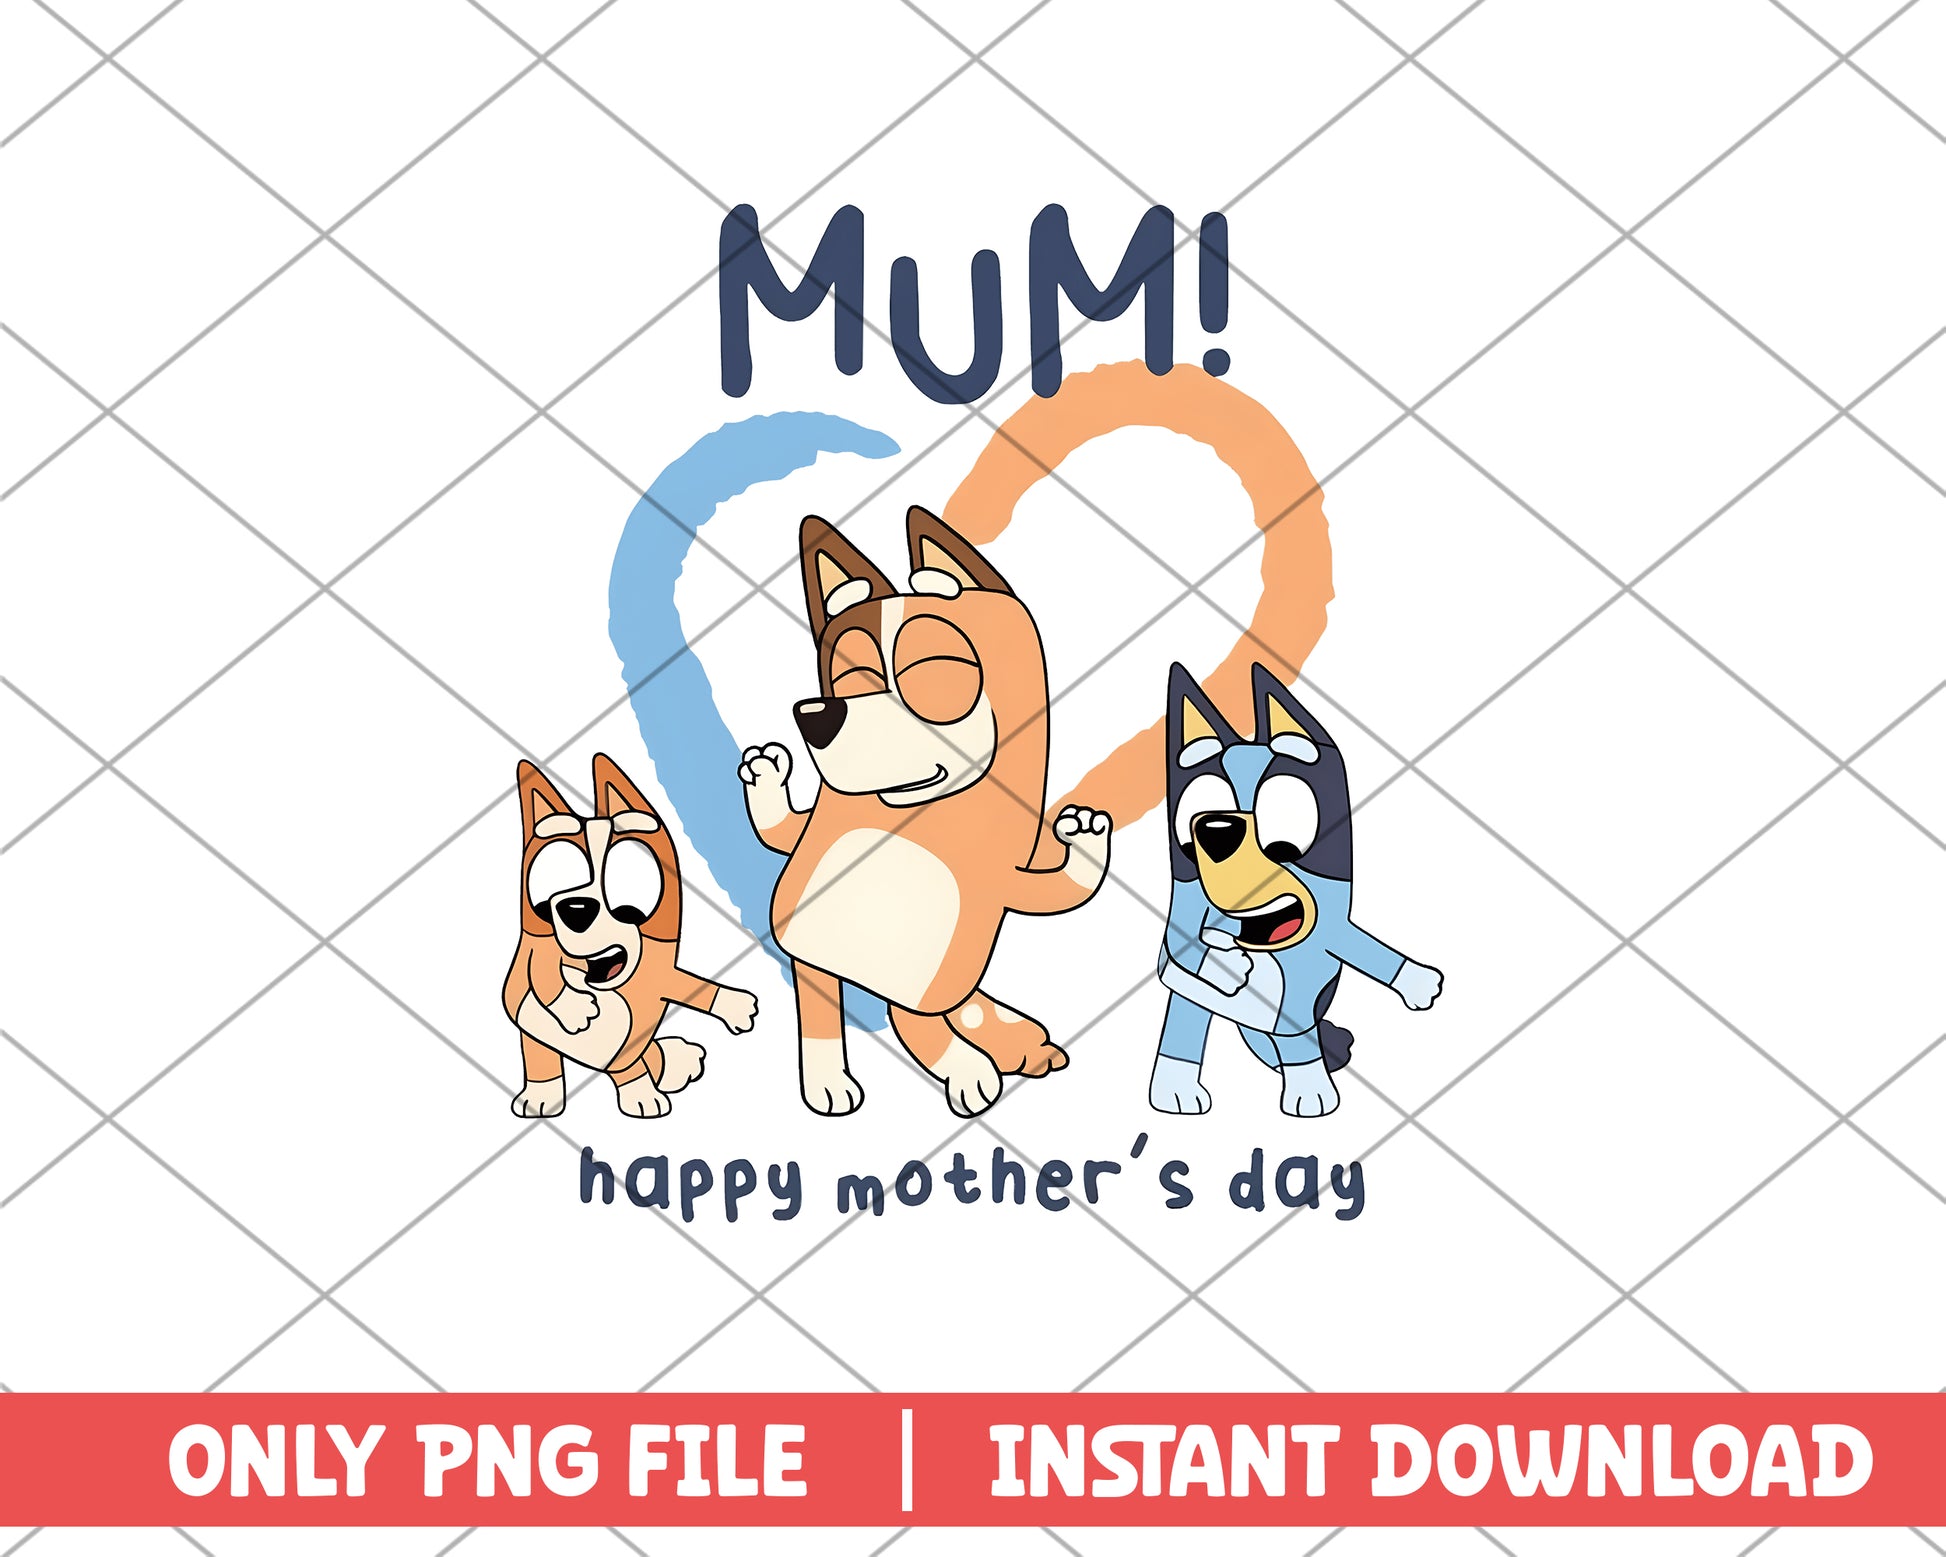 Mum happy mother's day Bluey family png